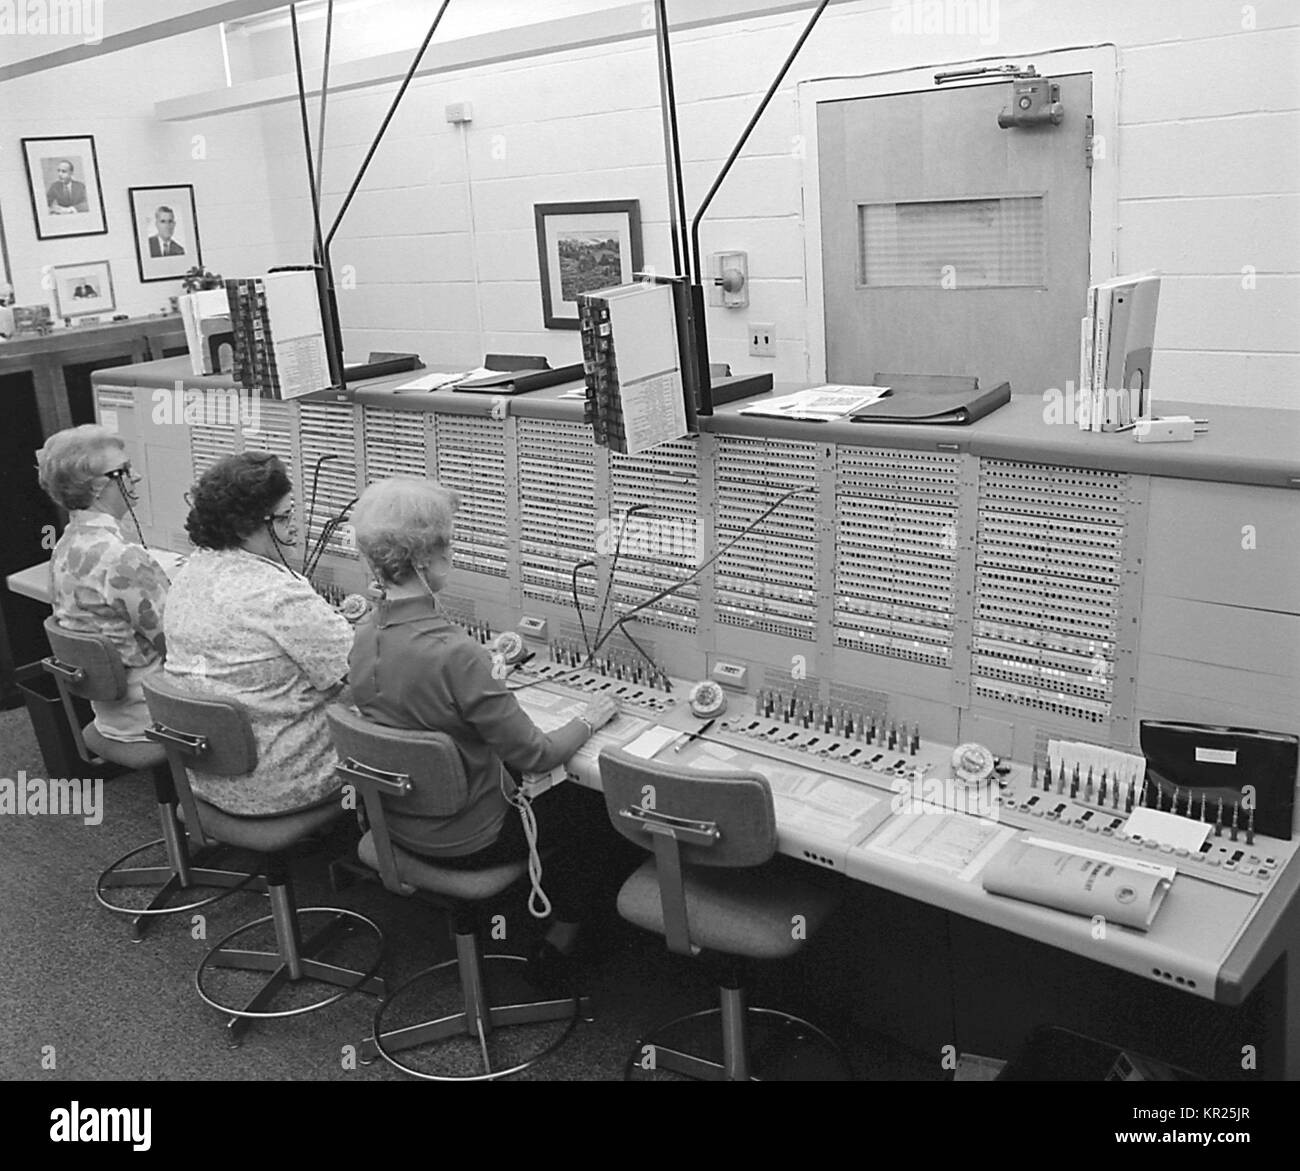 This historic image depicts a number of operators answering calls at what was the Centers for Disease Control and Prevention's (CDC) switchboard. Image courtesy CDC, 1975. Stock Photo